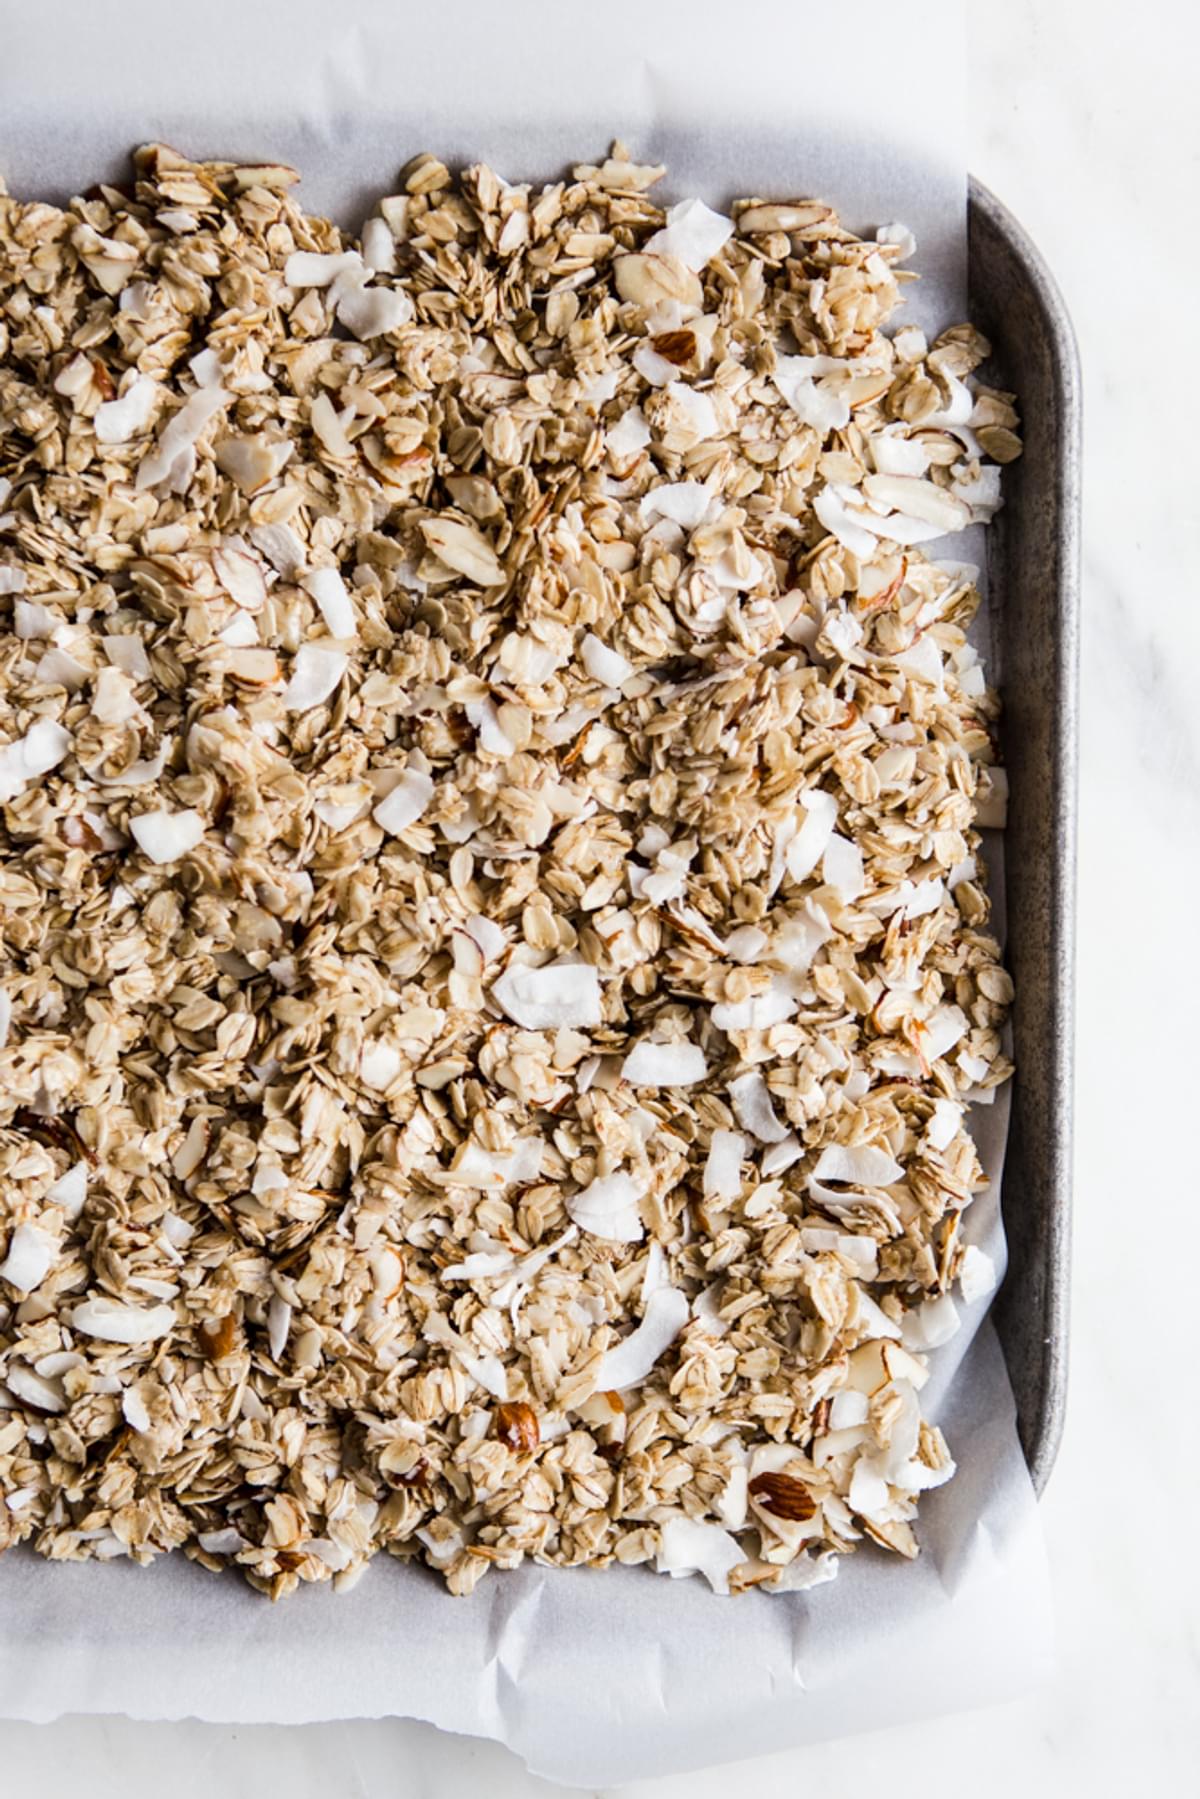 homemade Granola with Figs, Almonds and Coconut on a baking sheet with parchment paper